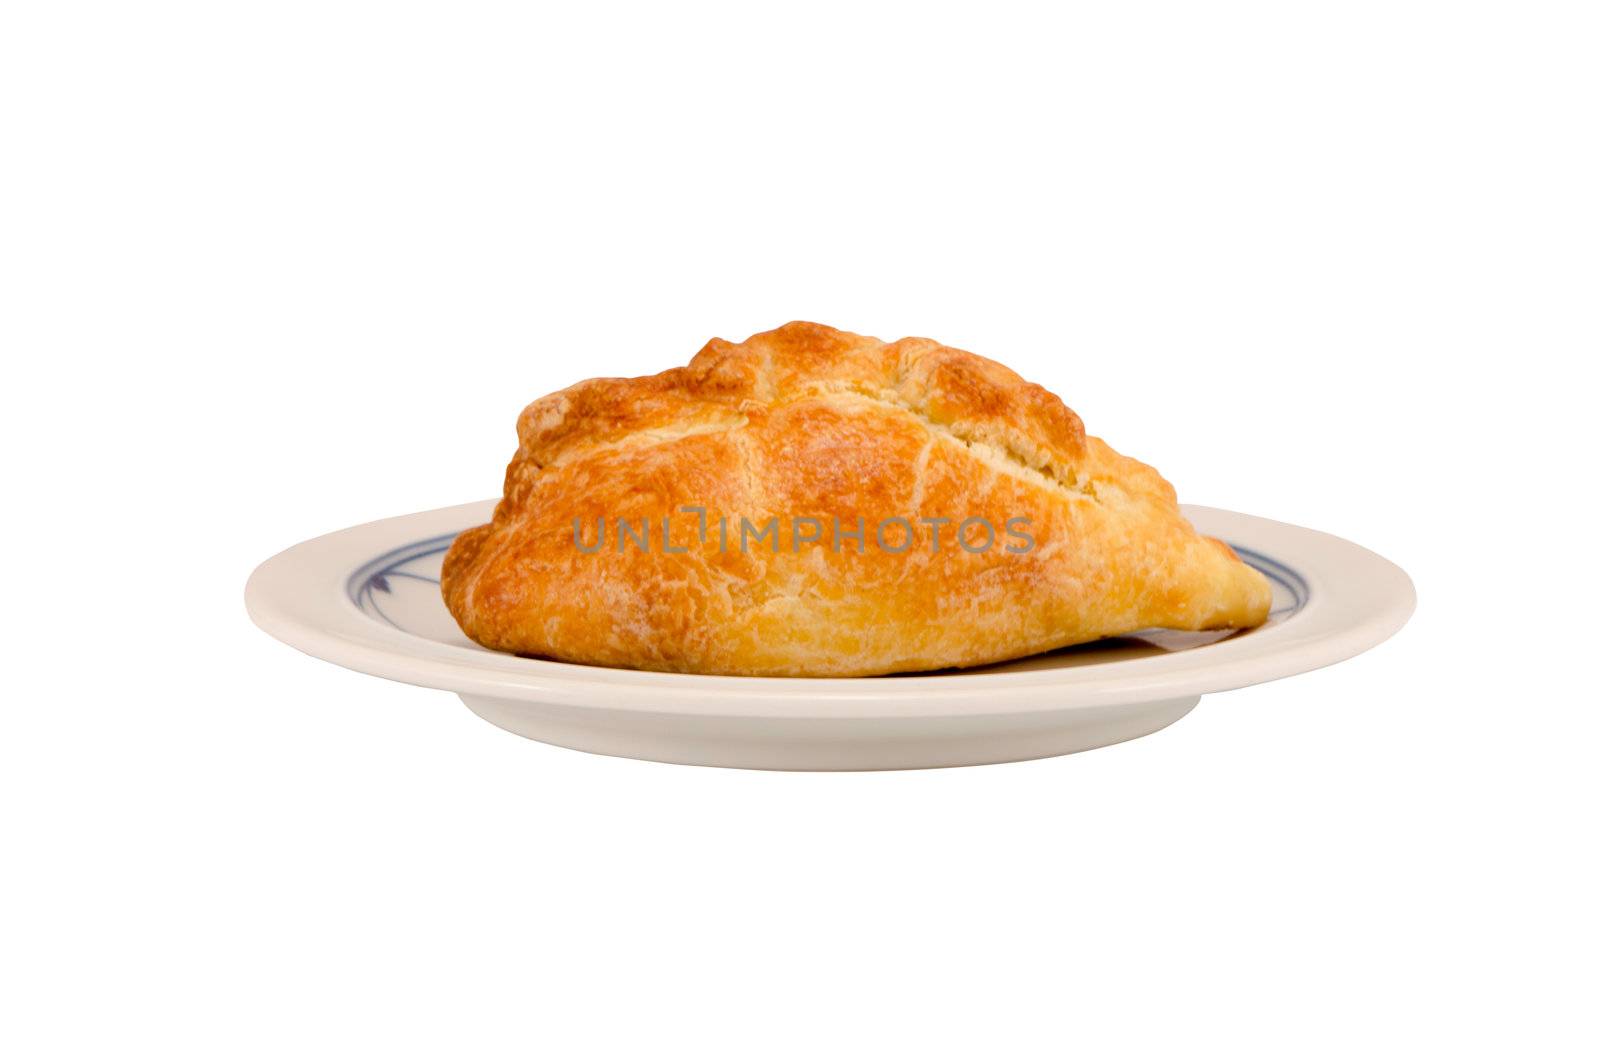 Karaite pastry stuffed with chopped lamb in dish isolated on white background.